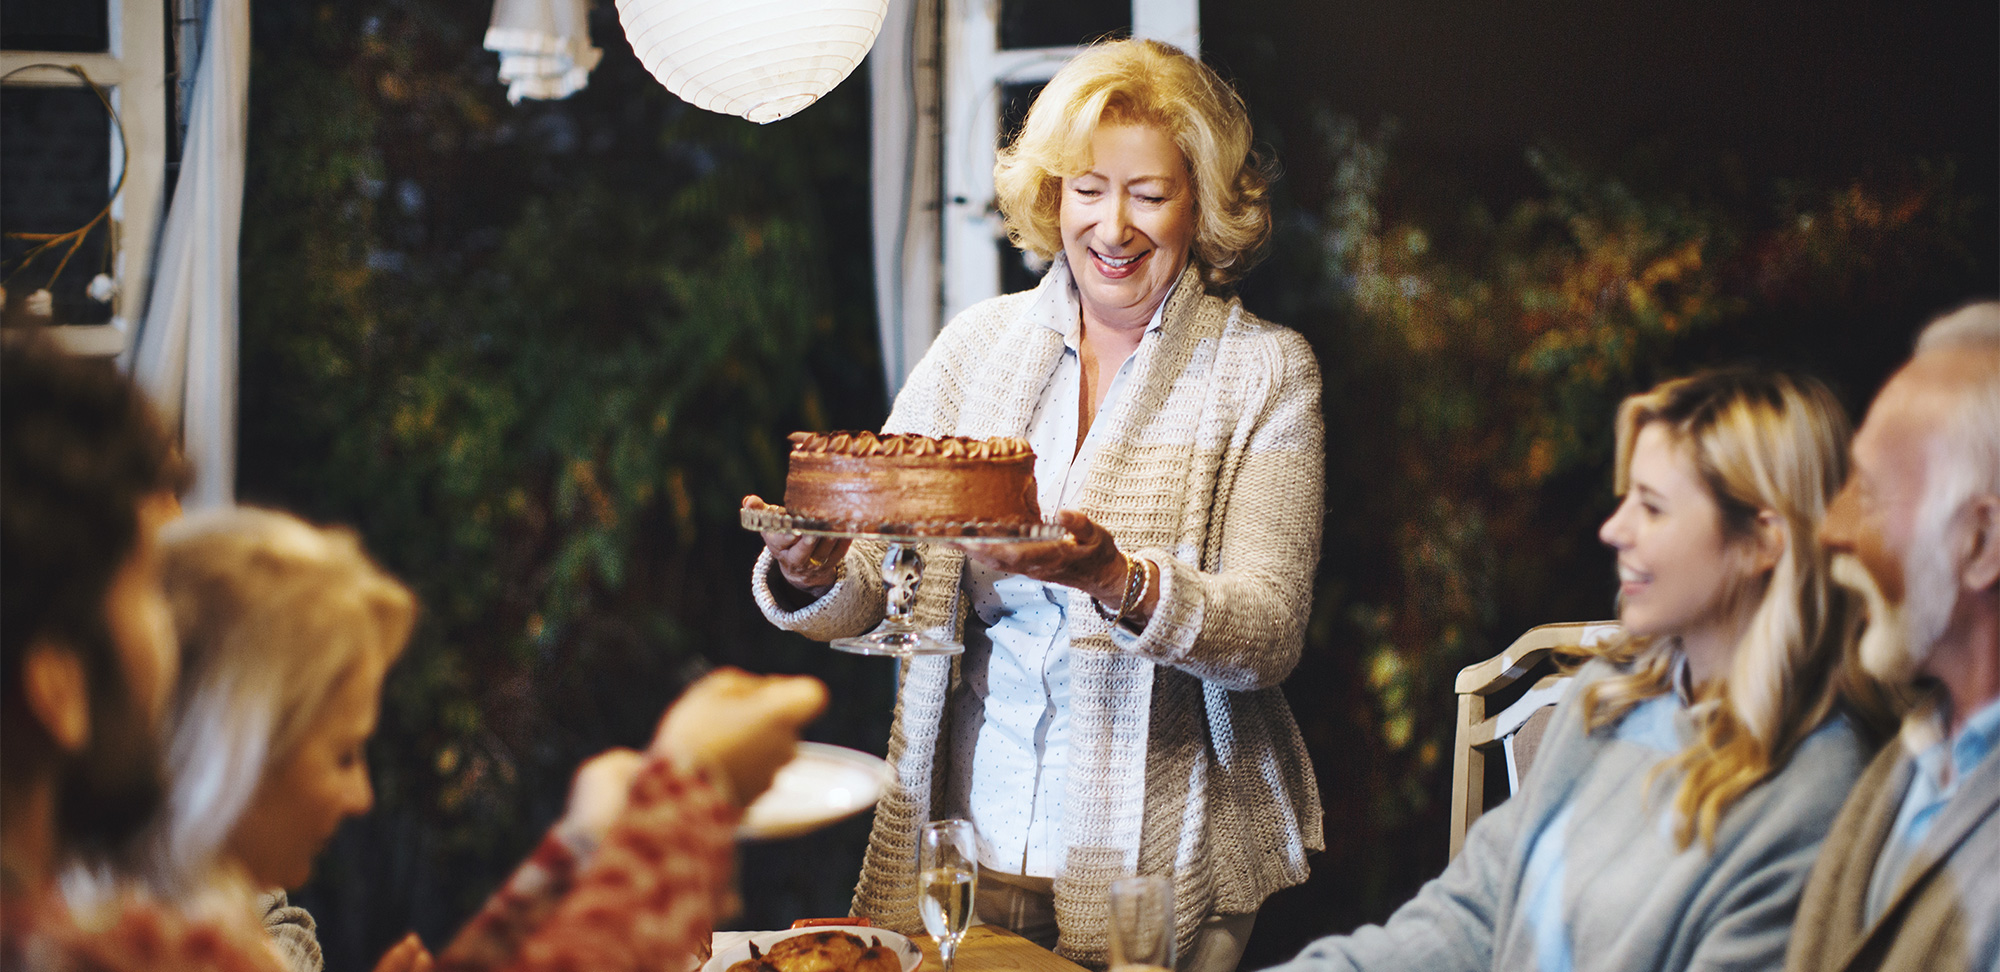 Photo of a Family celebrating Thanksgiving together. Senior woman serving chocolate cake to her family.